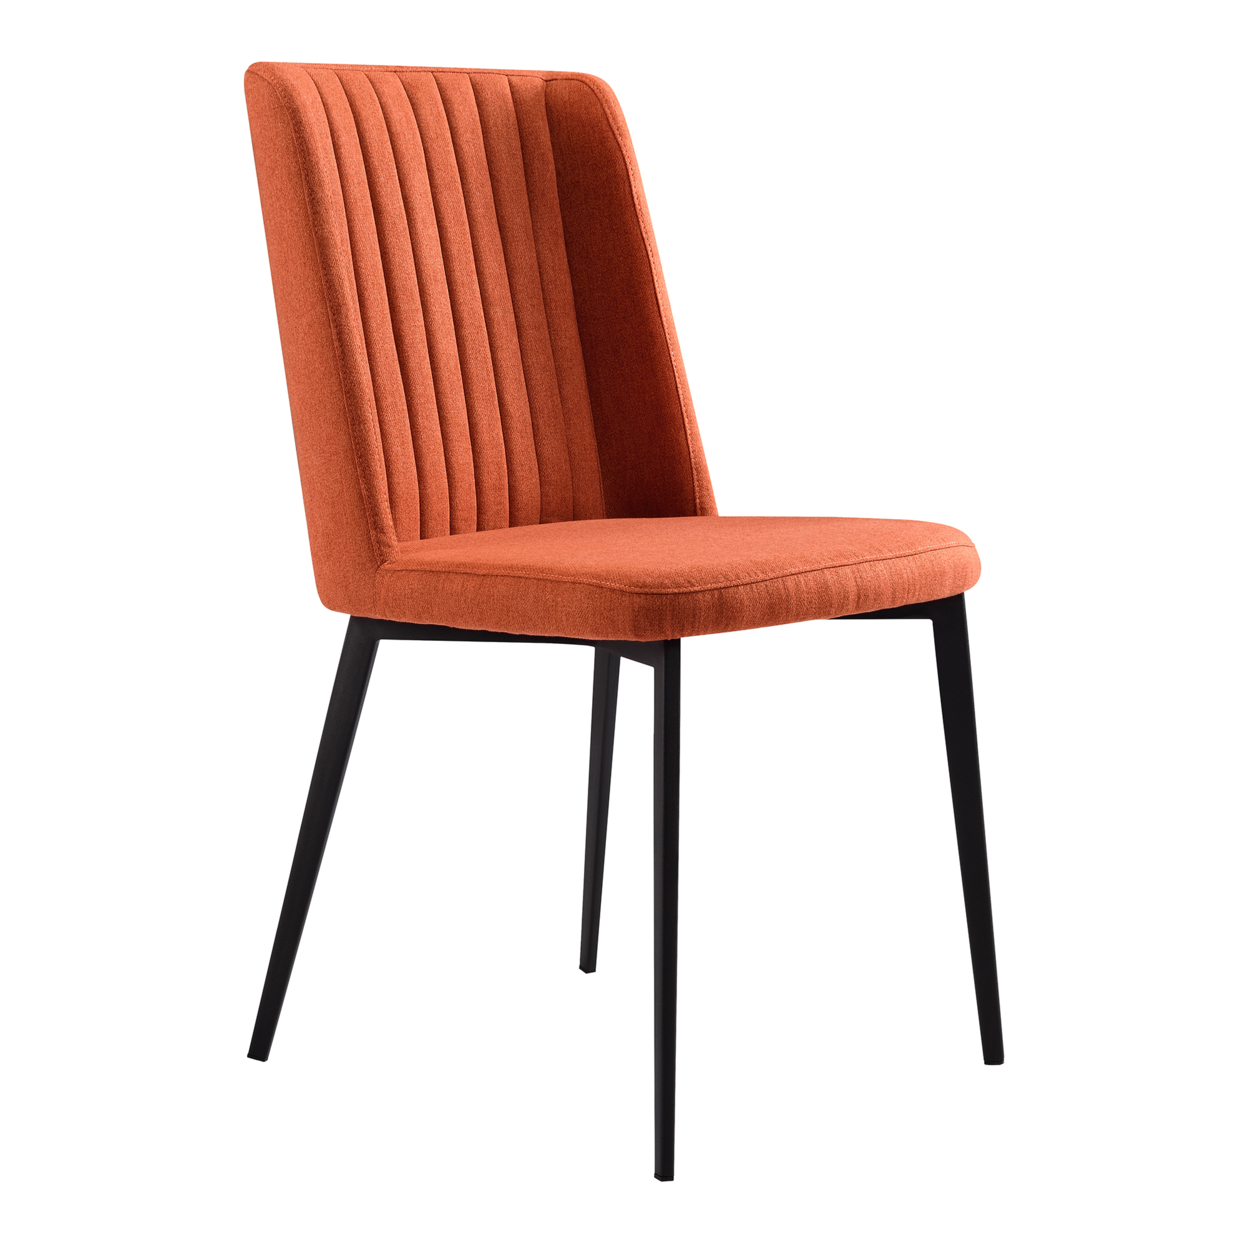 Fabric Dining Chair With Vertically Stitched Backrest, Set Of 2, Orange- Saltoro Sherpi